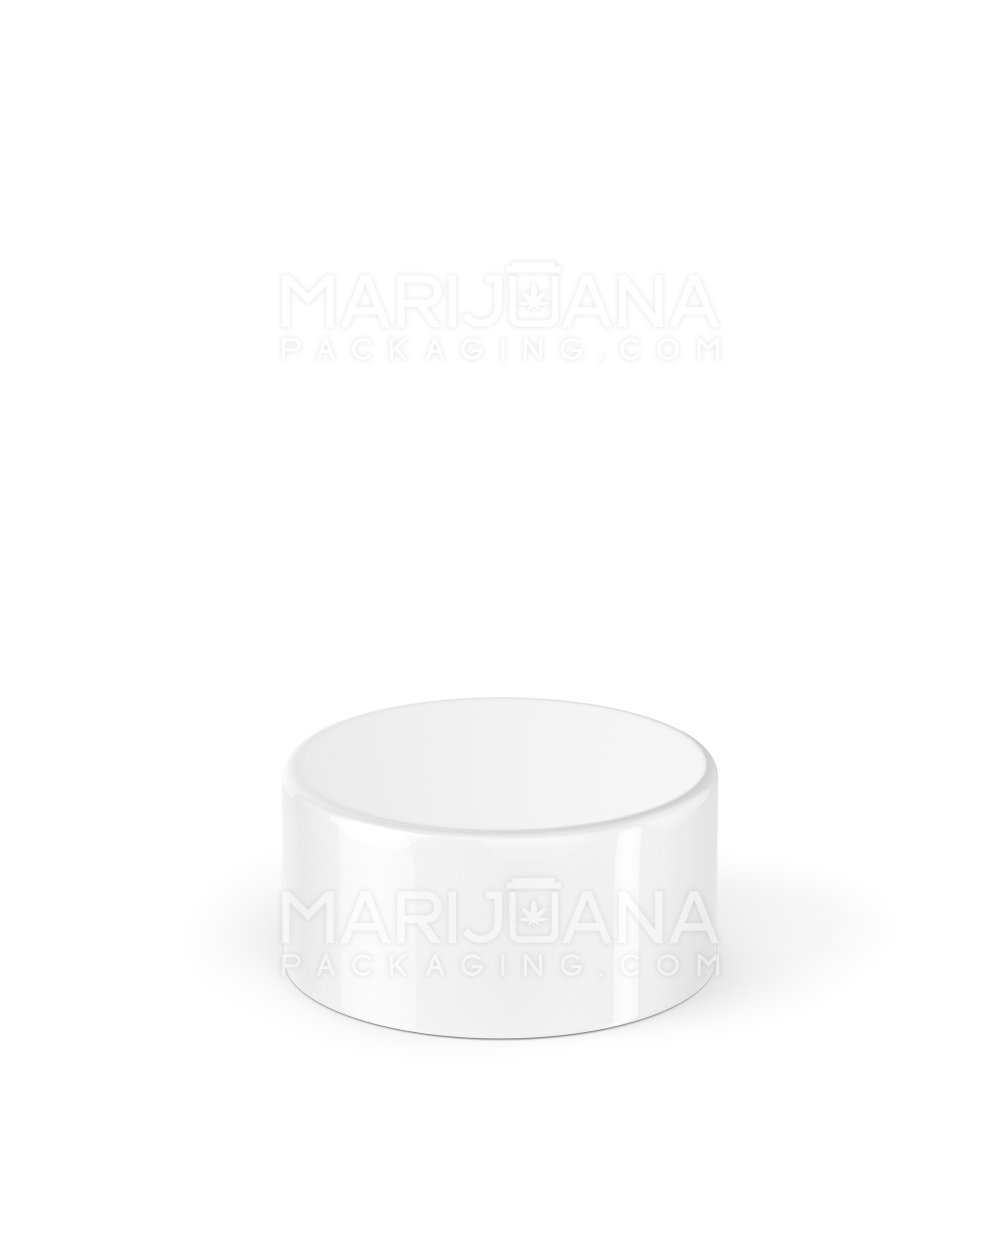 Child Resistant | Smooth Push Down & Turn Plastic Caps w/ Foil Liner | 28mm - Glossy White - 504 Count - 3